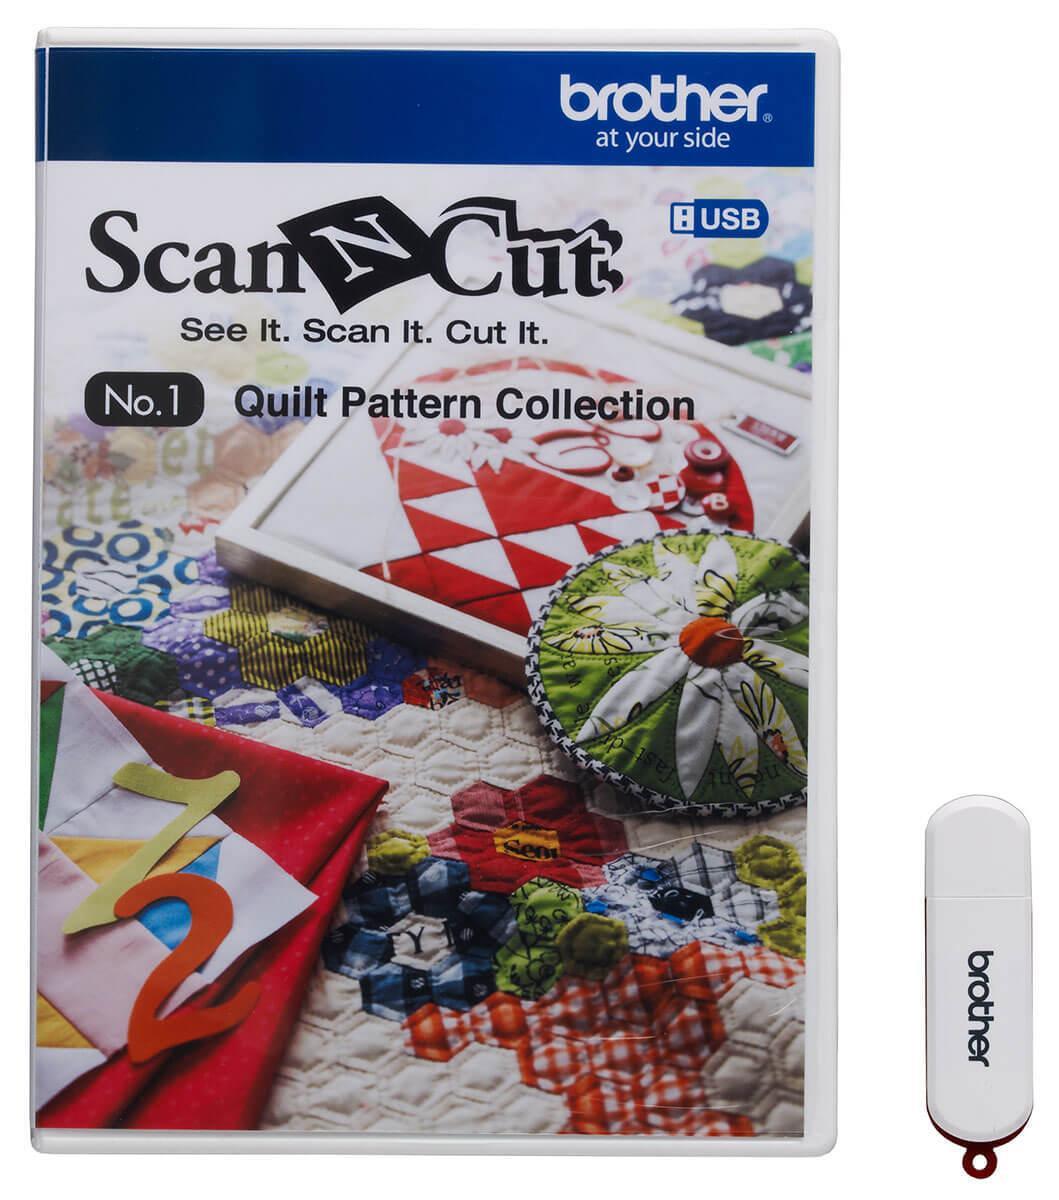 USB No.1 Quilt Pattern for ScanNCut